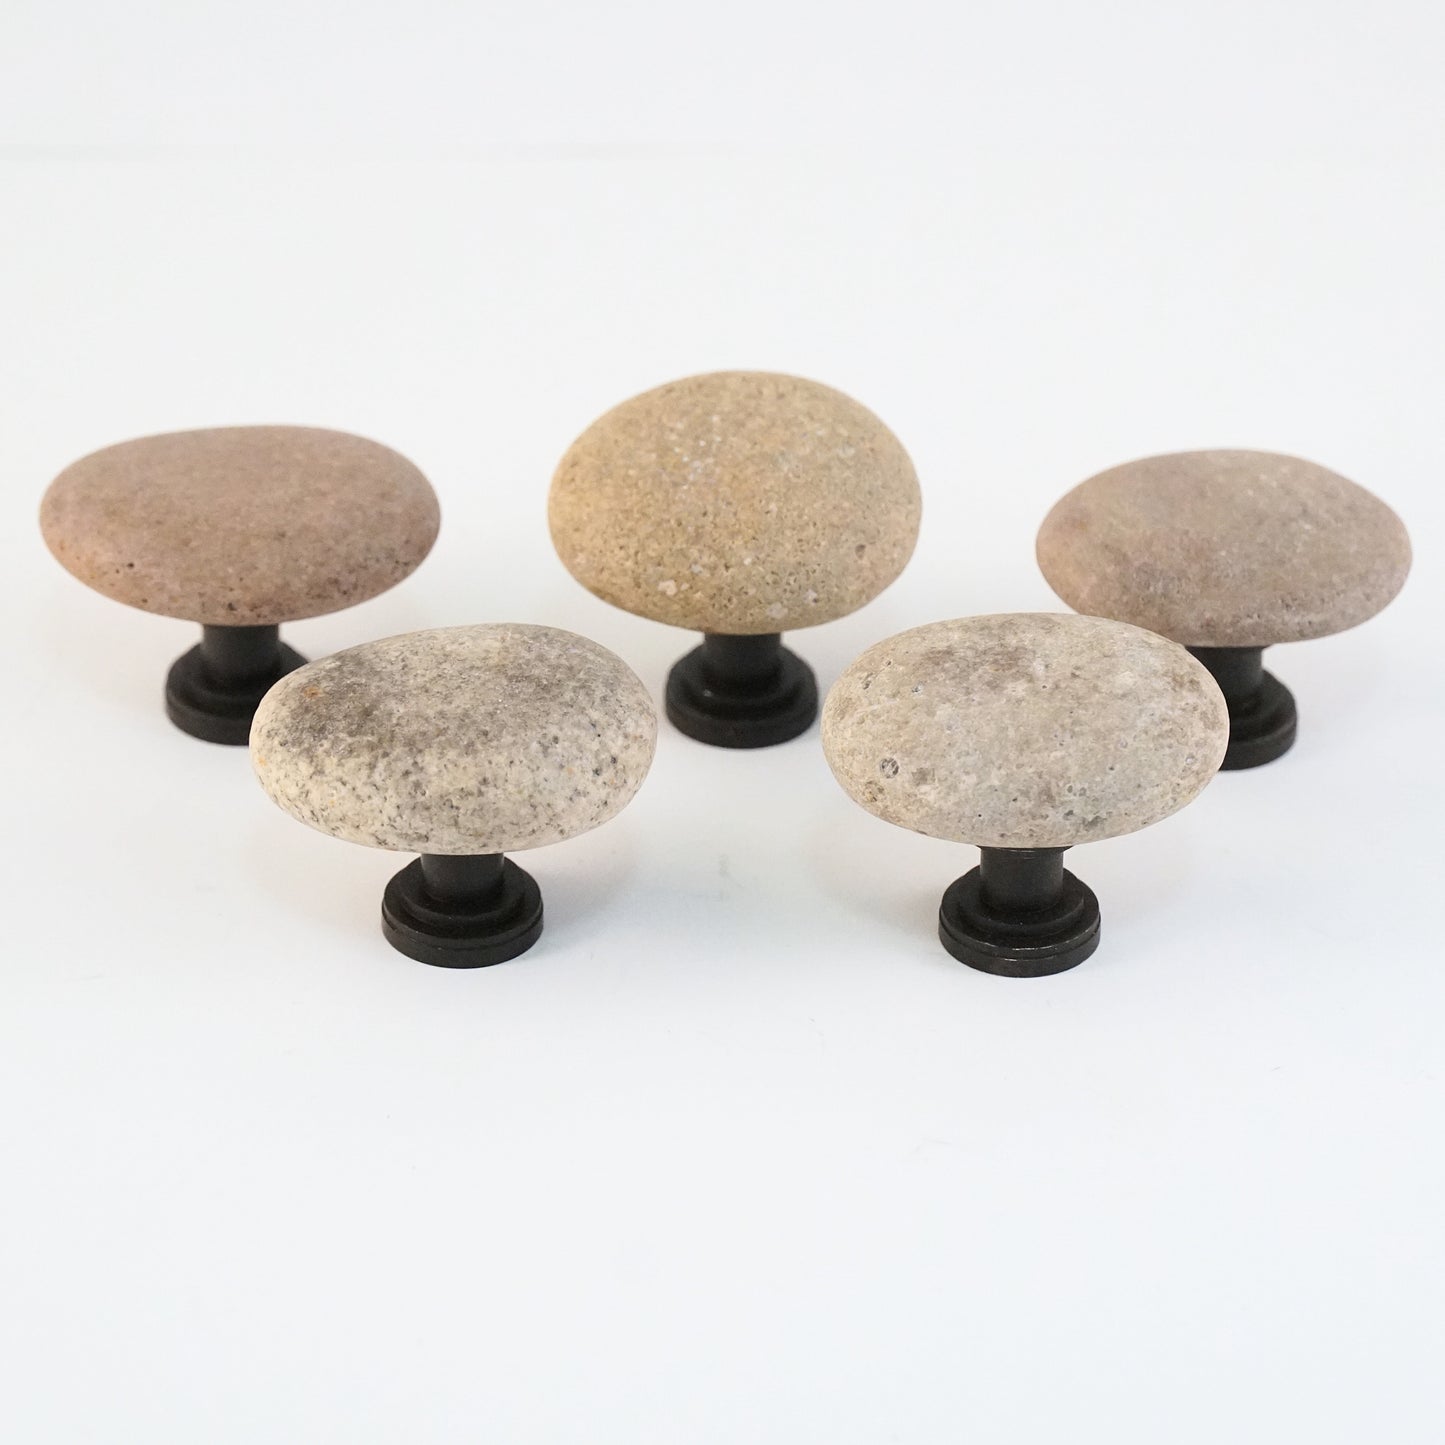 Beach Rock Stone Pebble Cabinet Knobs - Set of 5 - Ready to Ship